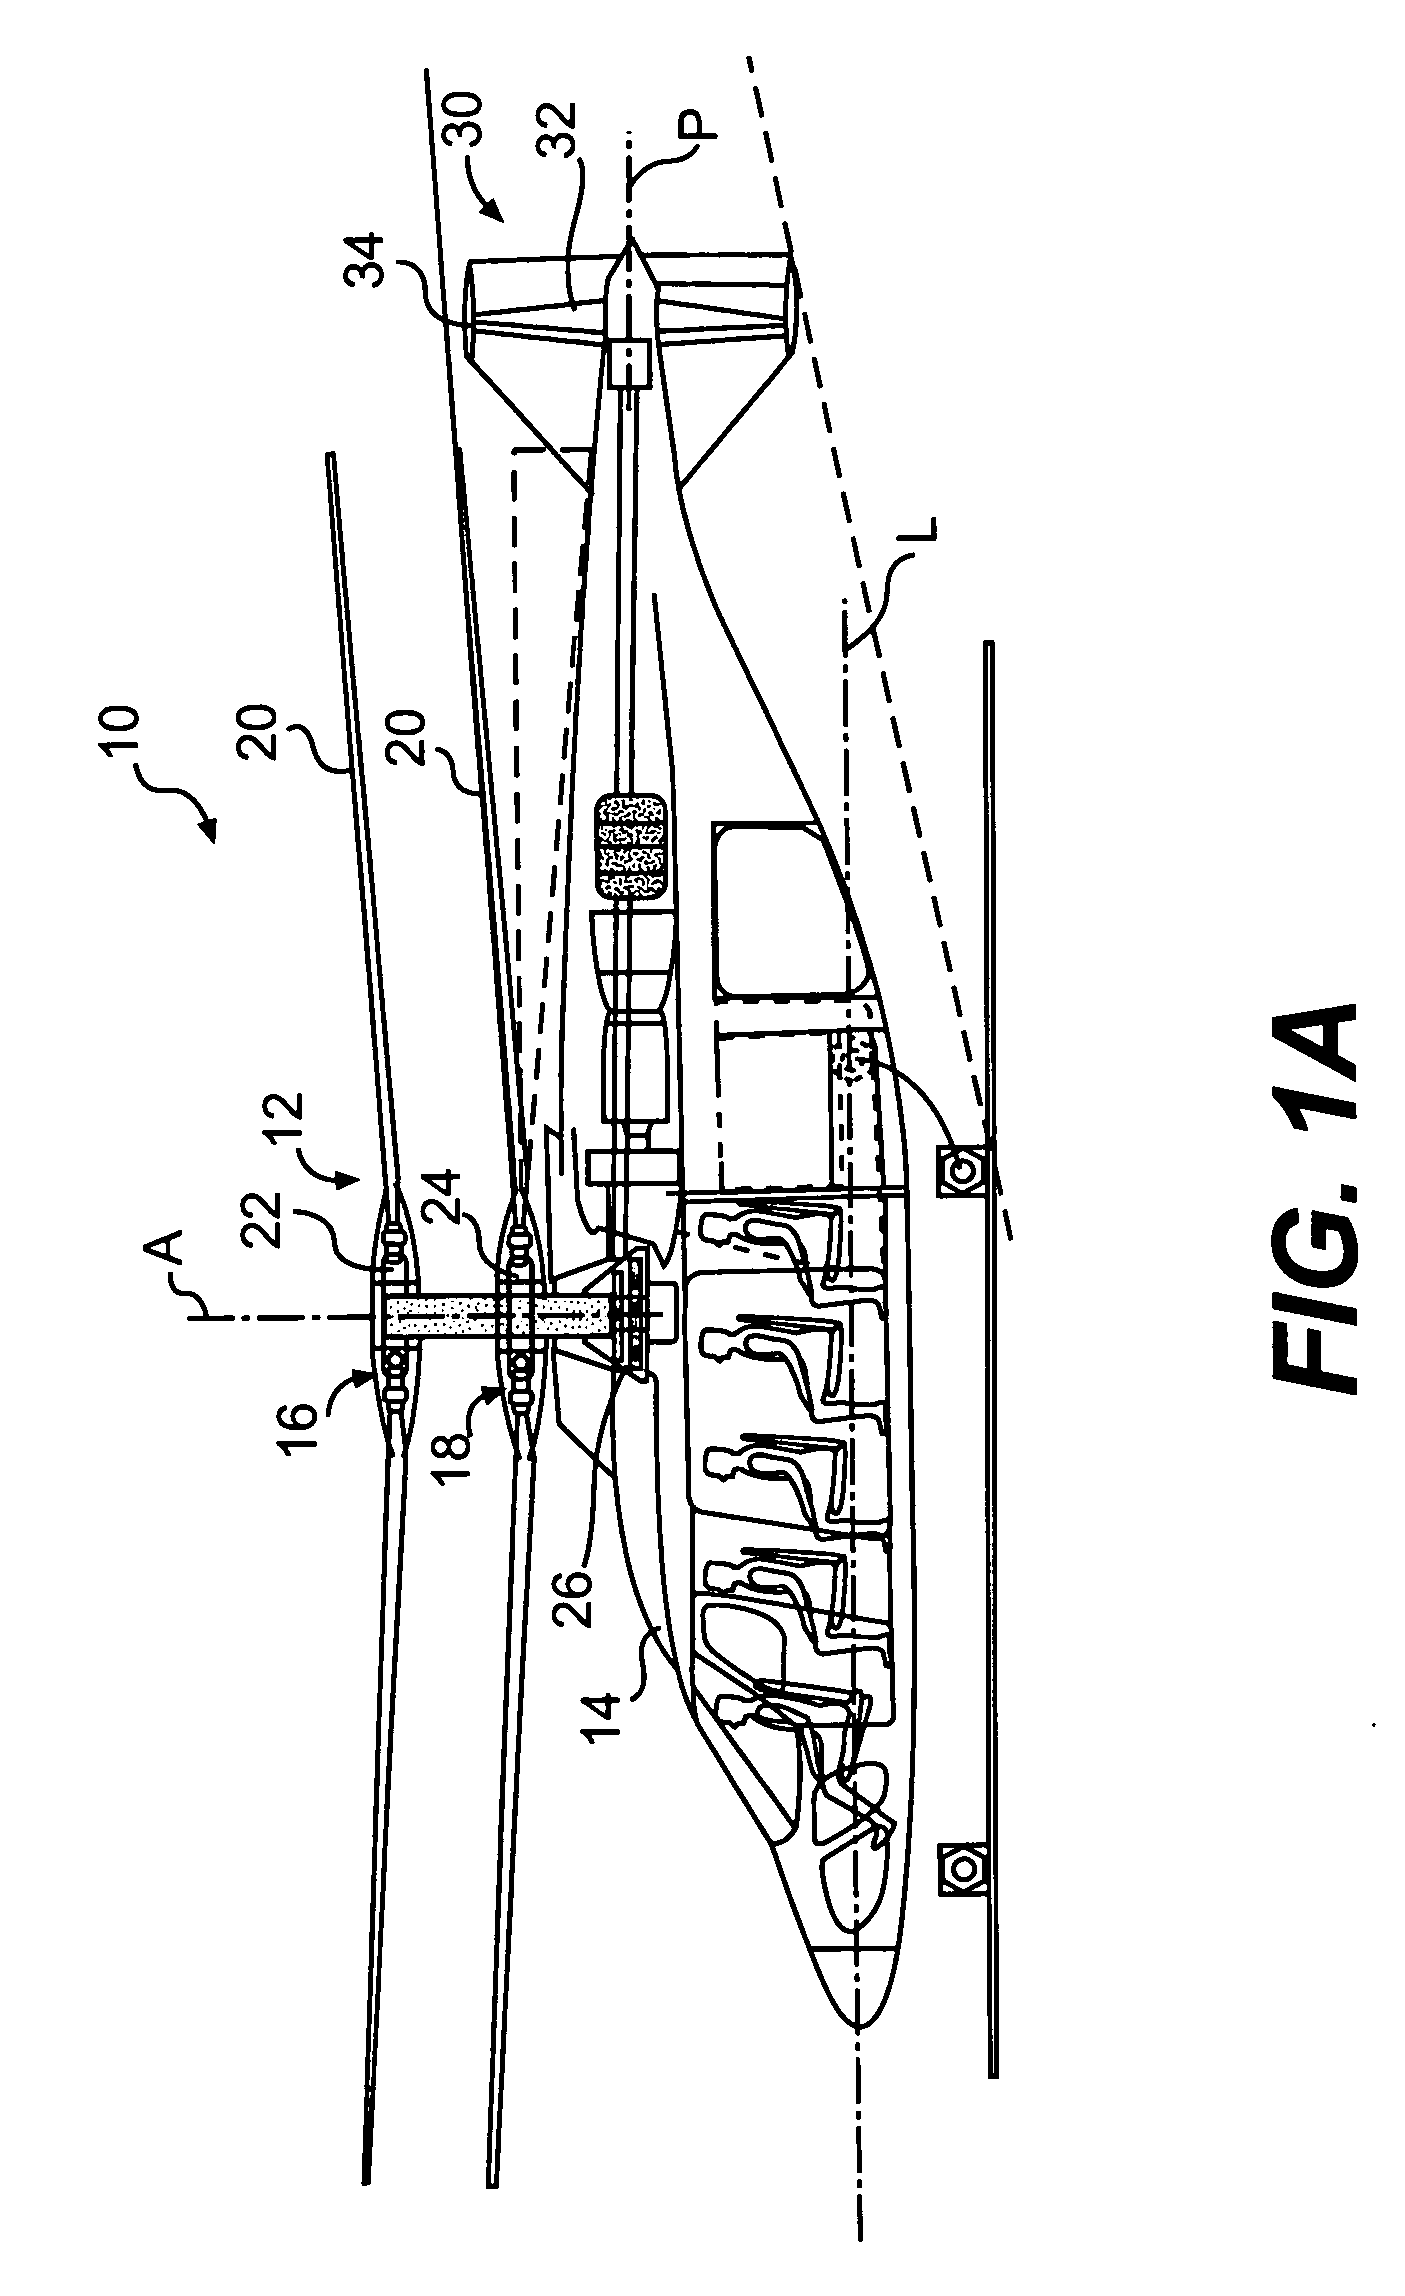 Rotor drive and control system for a high speed rotary wing aircraft